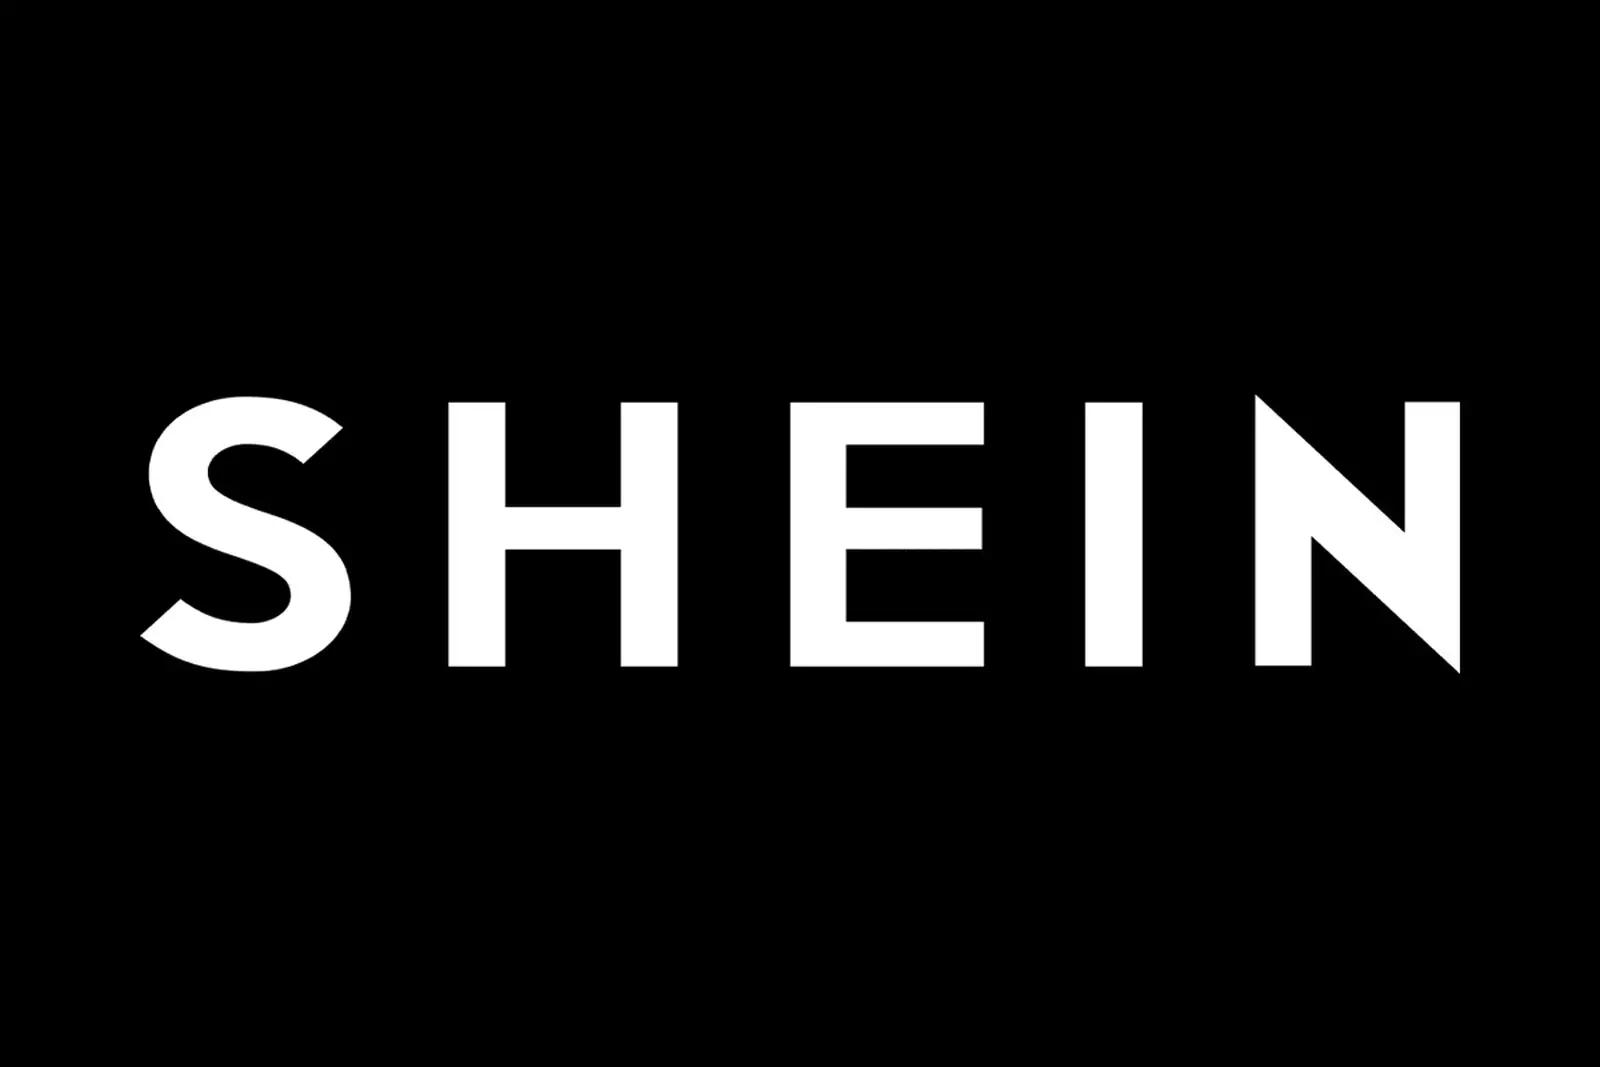 Is Shein Legit and Safe or a Scam